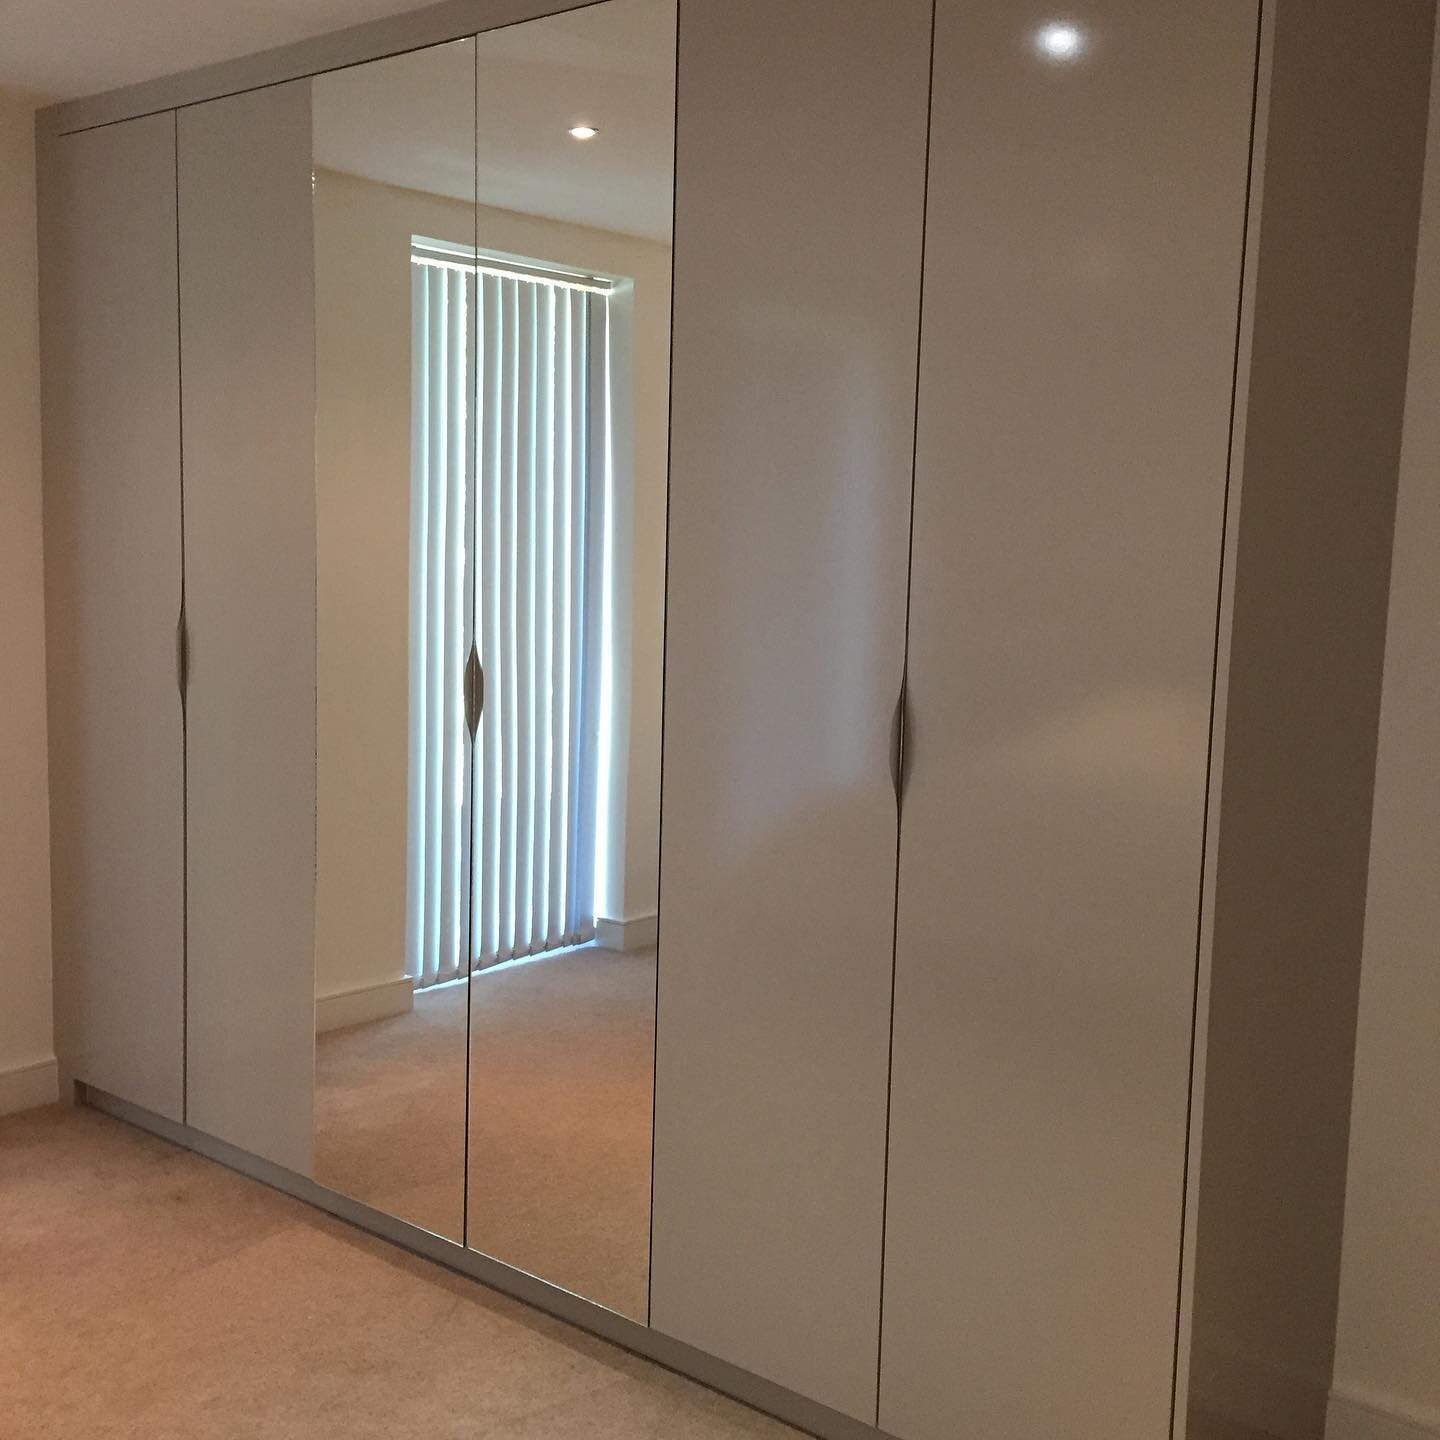 Beautiful fitted wardrobes recently designed, created and fitted by Ryan. A great storage solution for the client with lots of draws and space. #fittedwardrobes #bespokejoinery #chesterfield